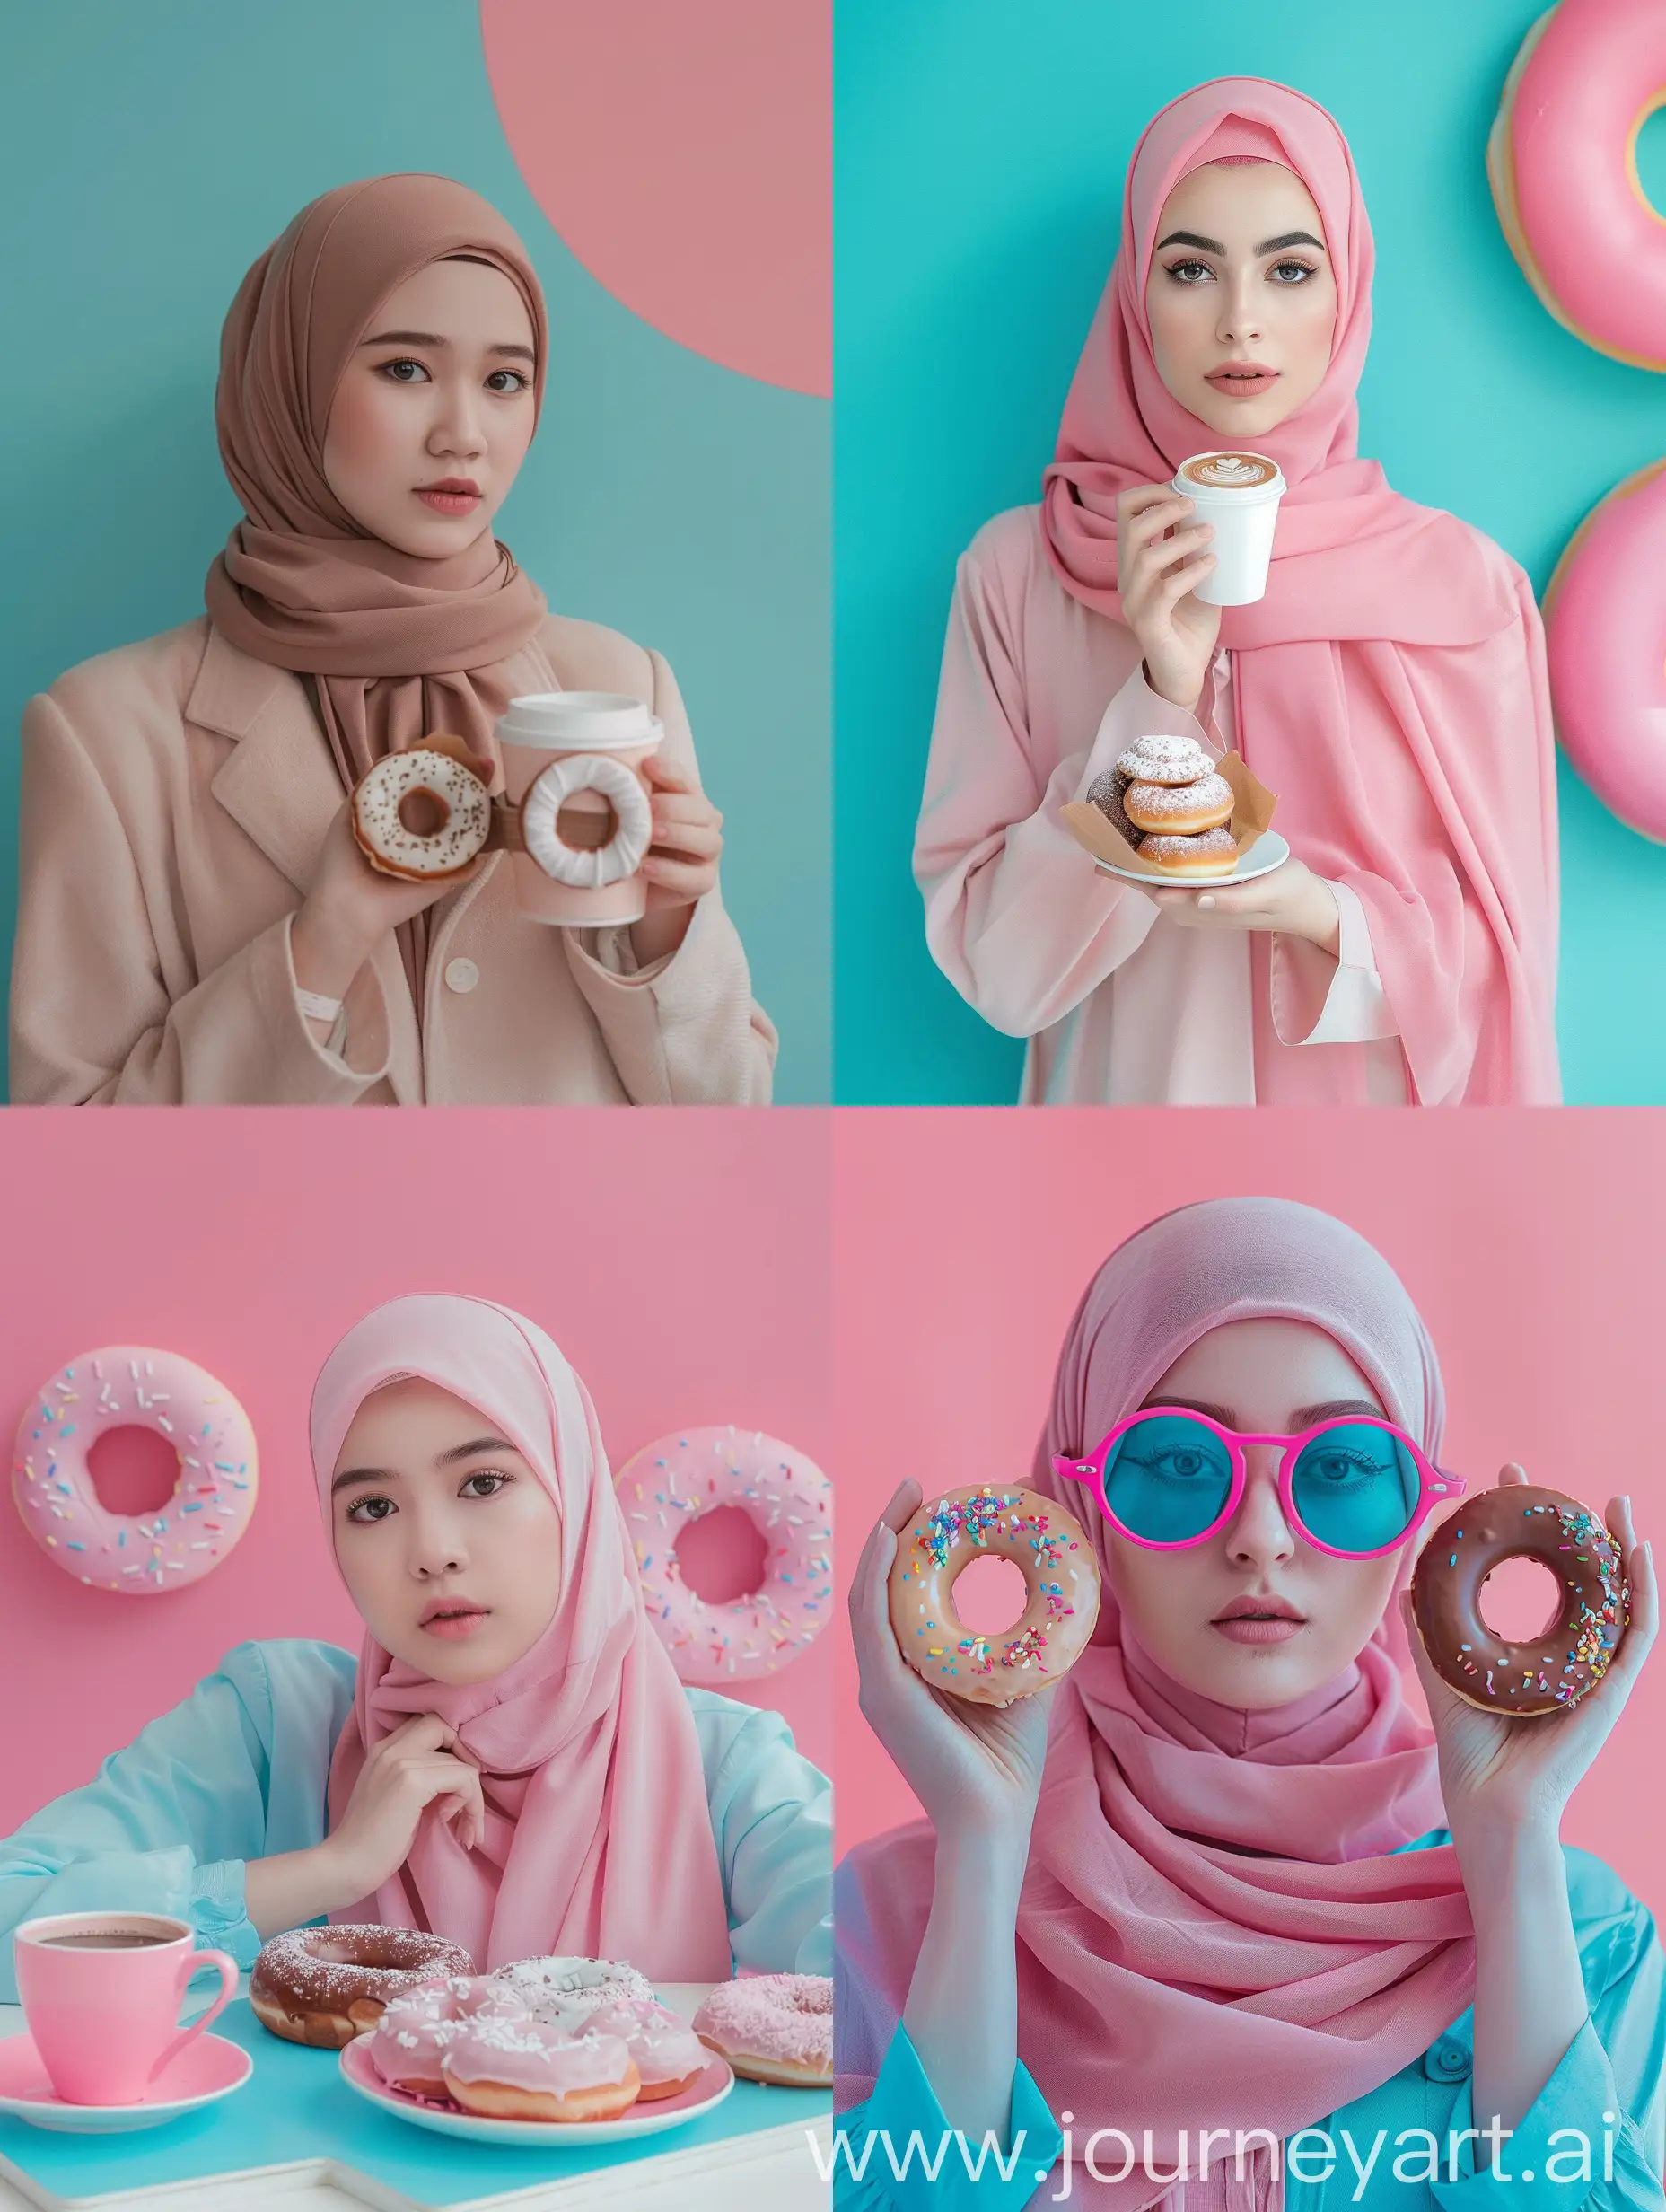 Minimalistic-Coffee-Shop-Scene-with-Coffee-Donuts-and-Pastries-in-Pink-and-Blue-Tones